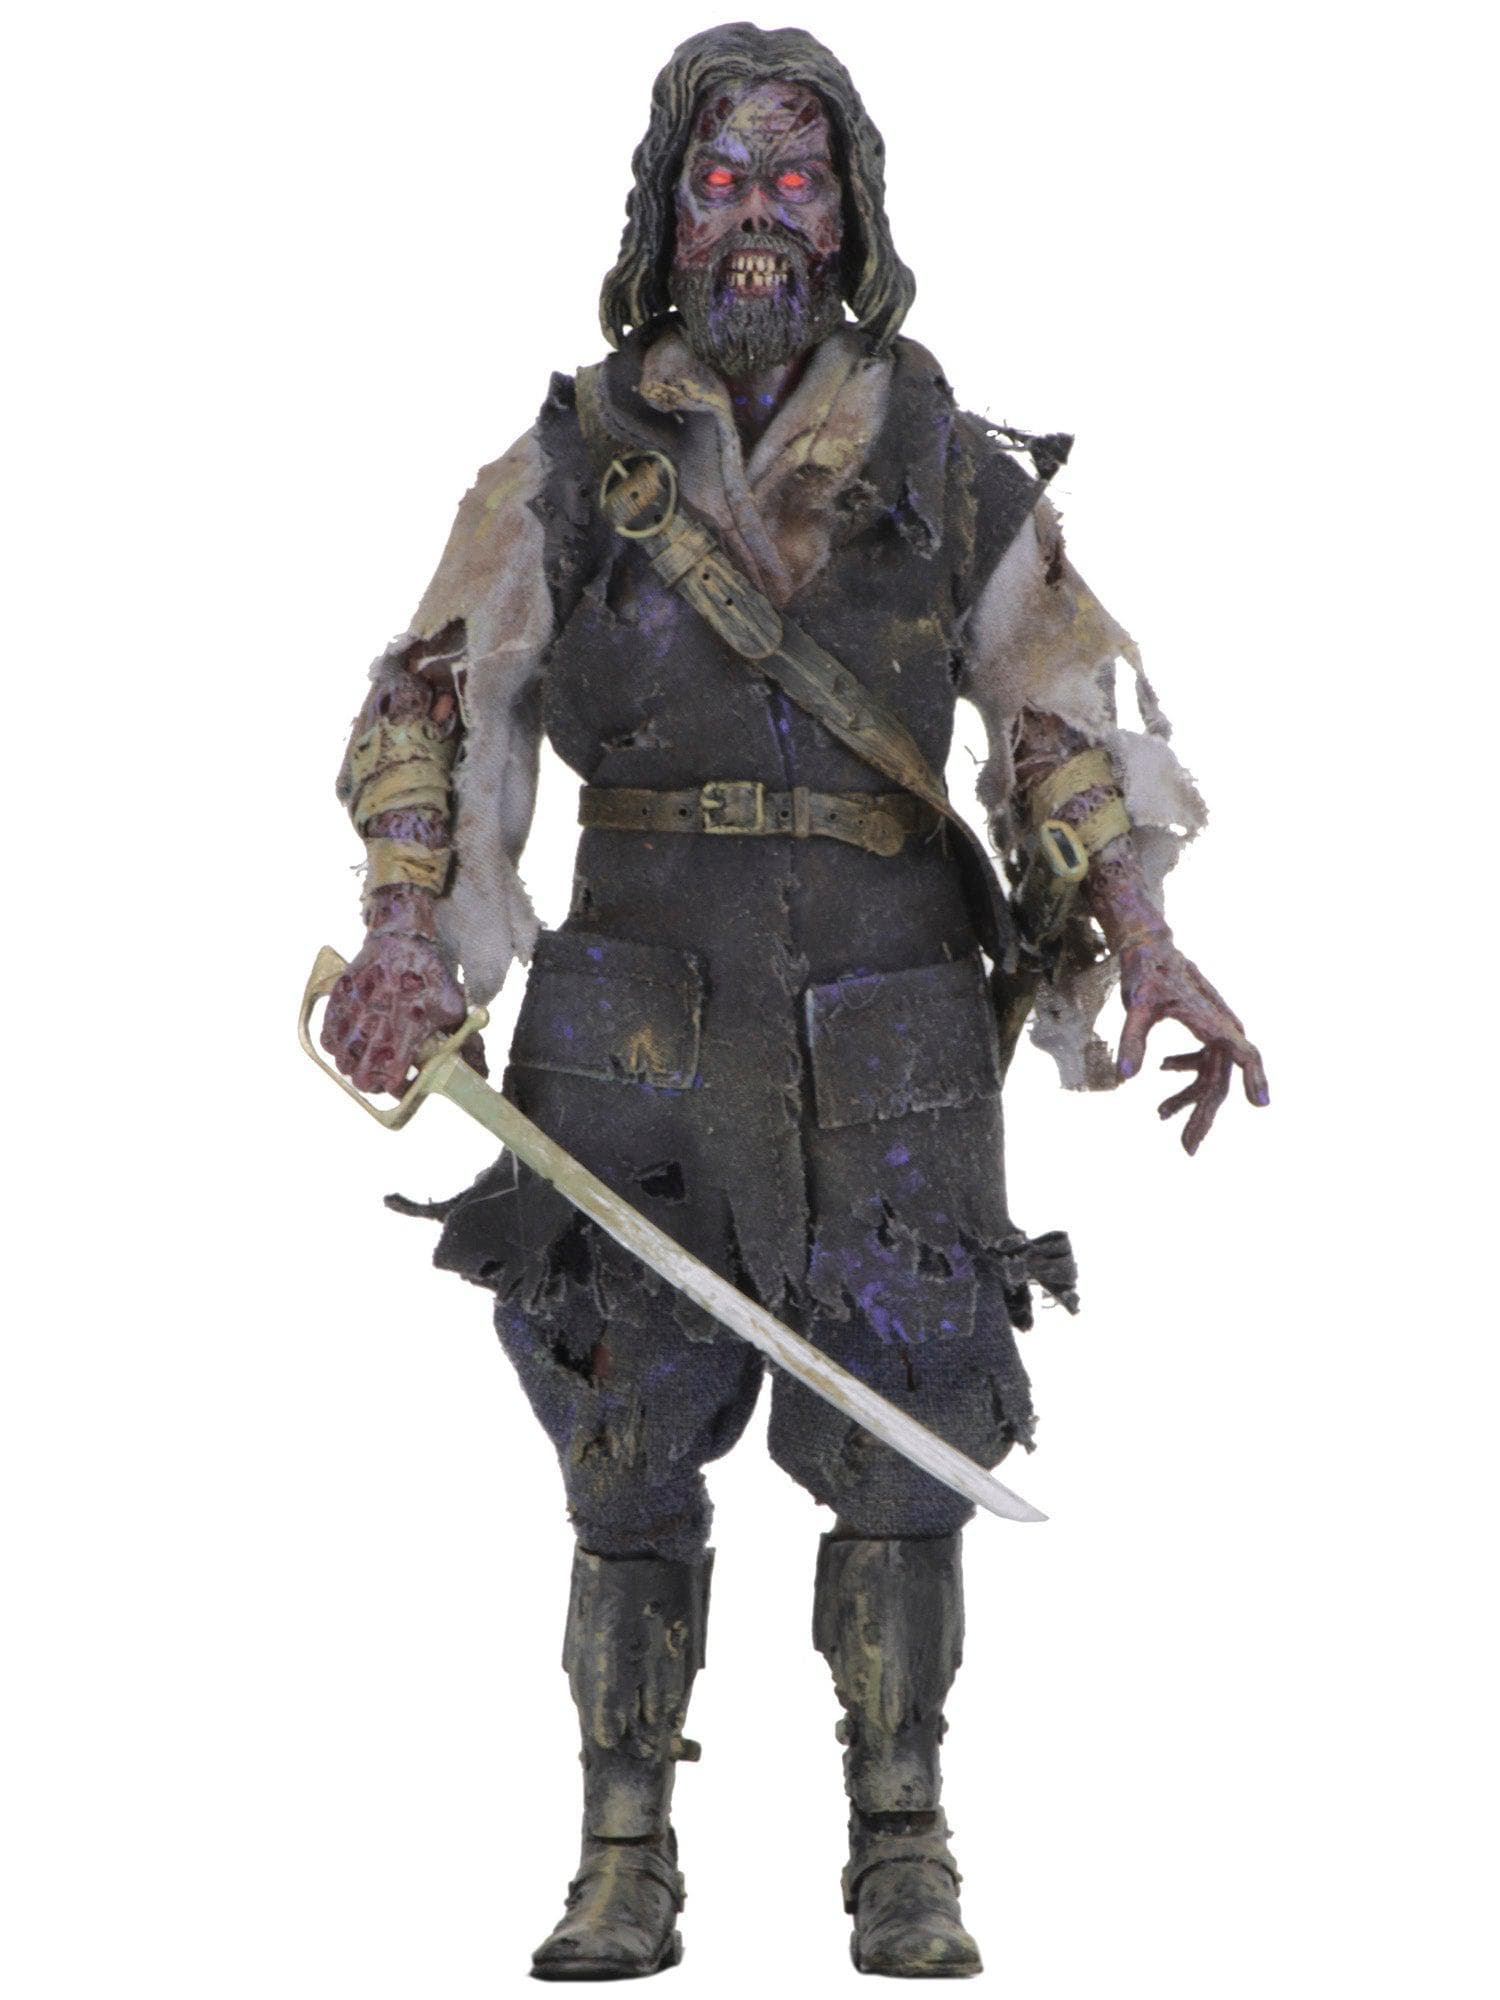 NECA - The Fog - 8" Clothed Action Figure - Captain Blake - costumes.com